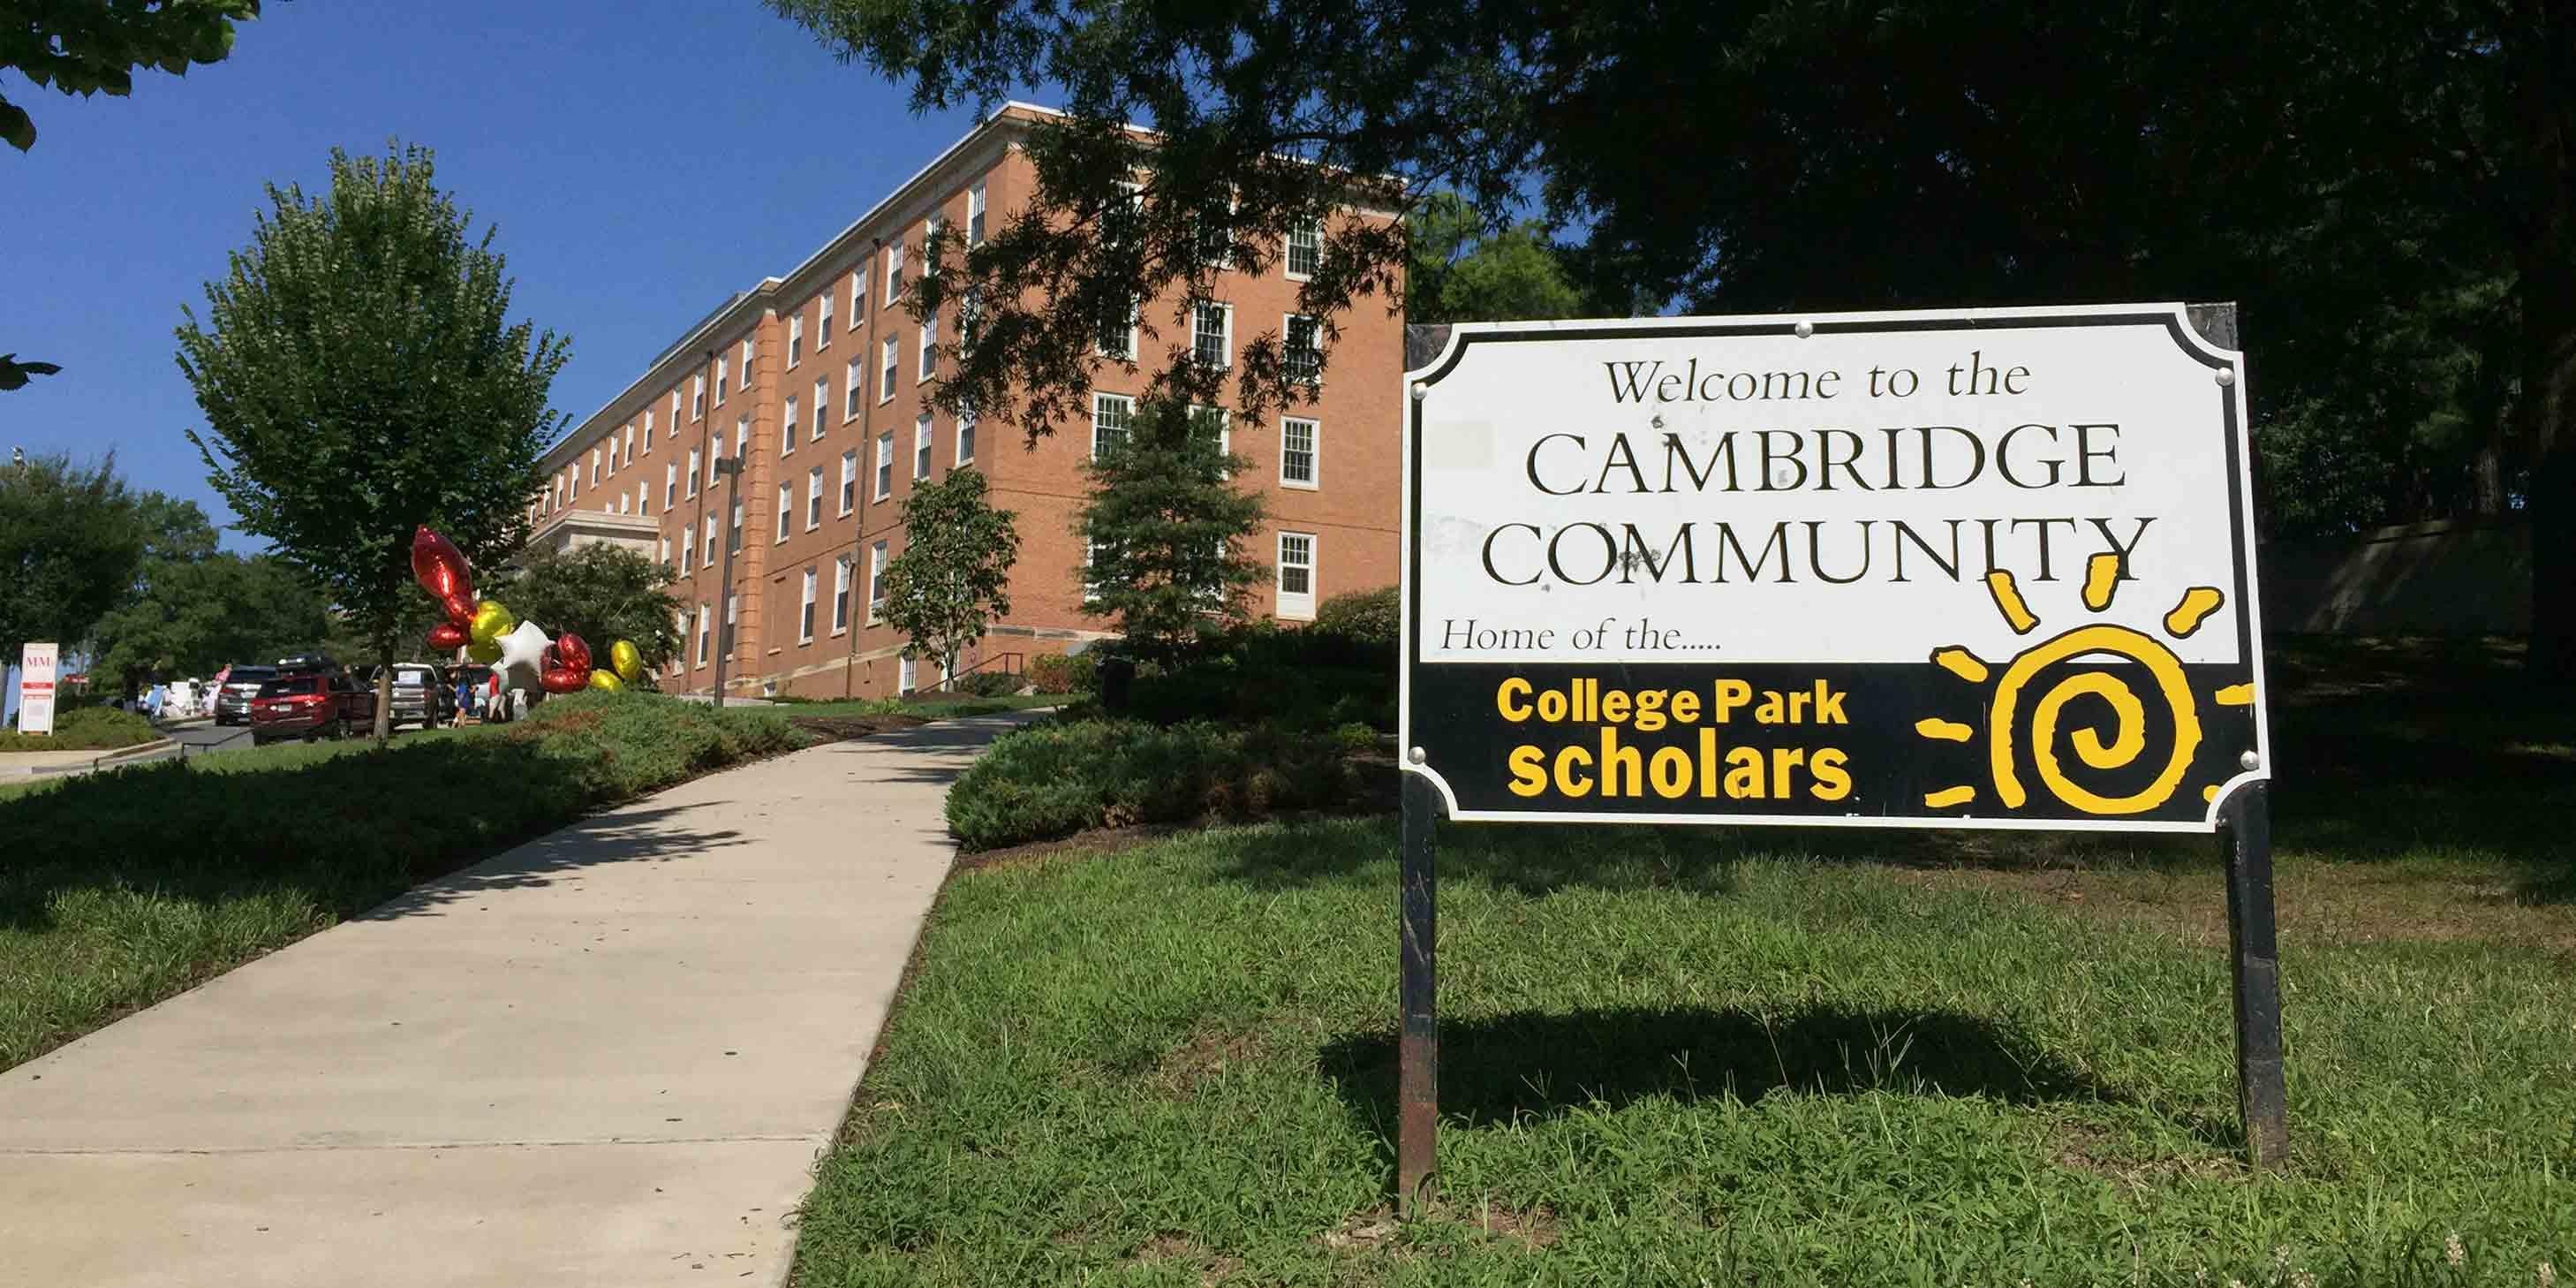 Cambridge Community sign and residence hall